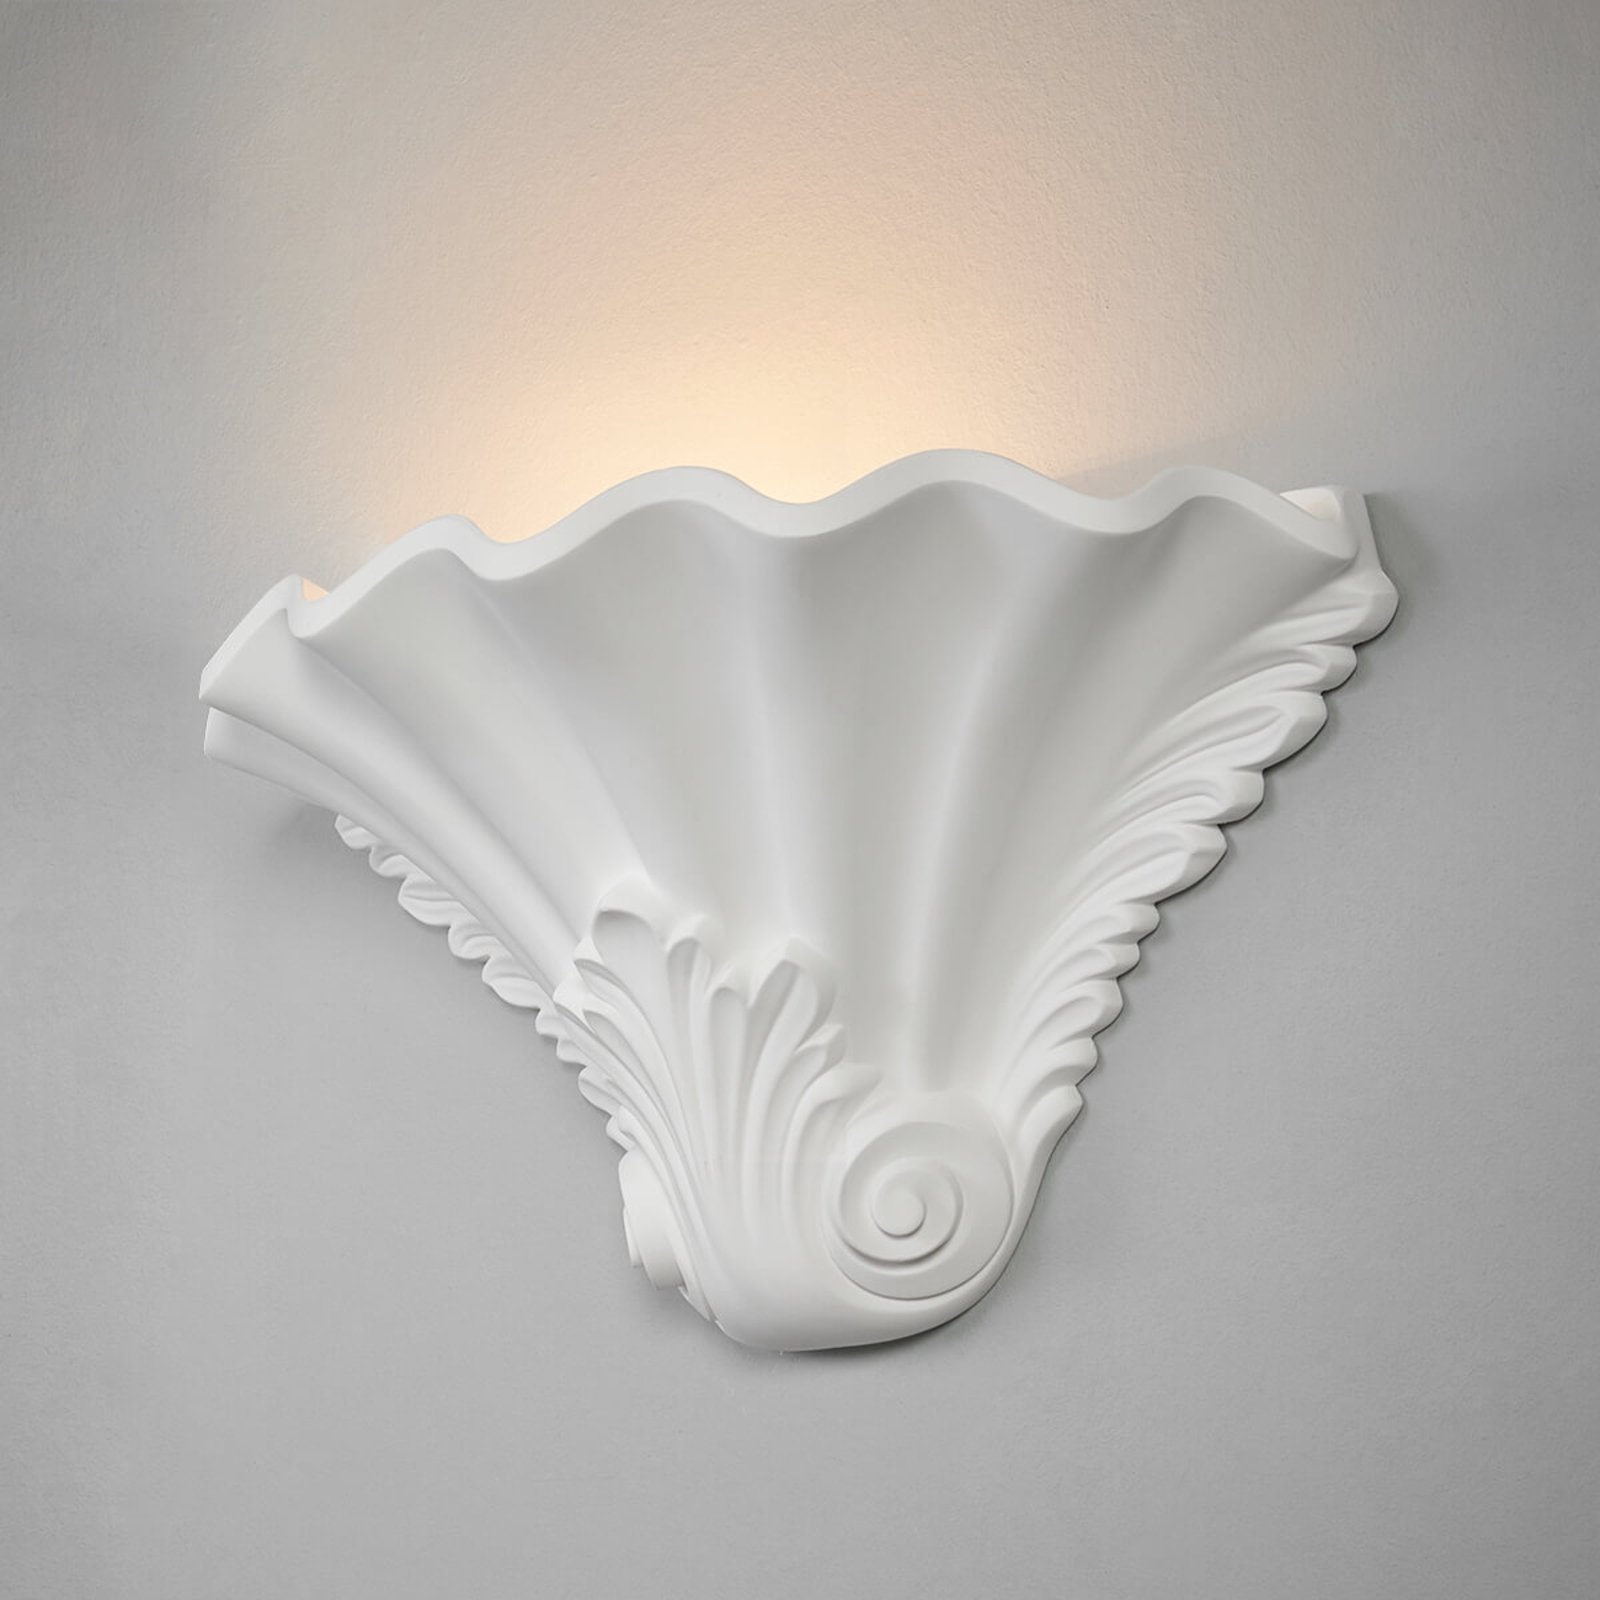 Relief-like plaster wall lamp Lennet in white